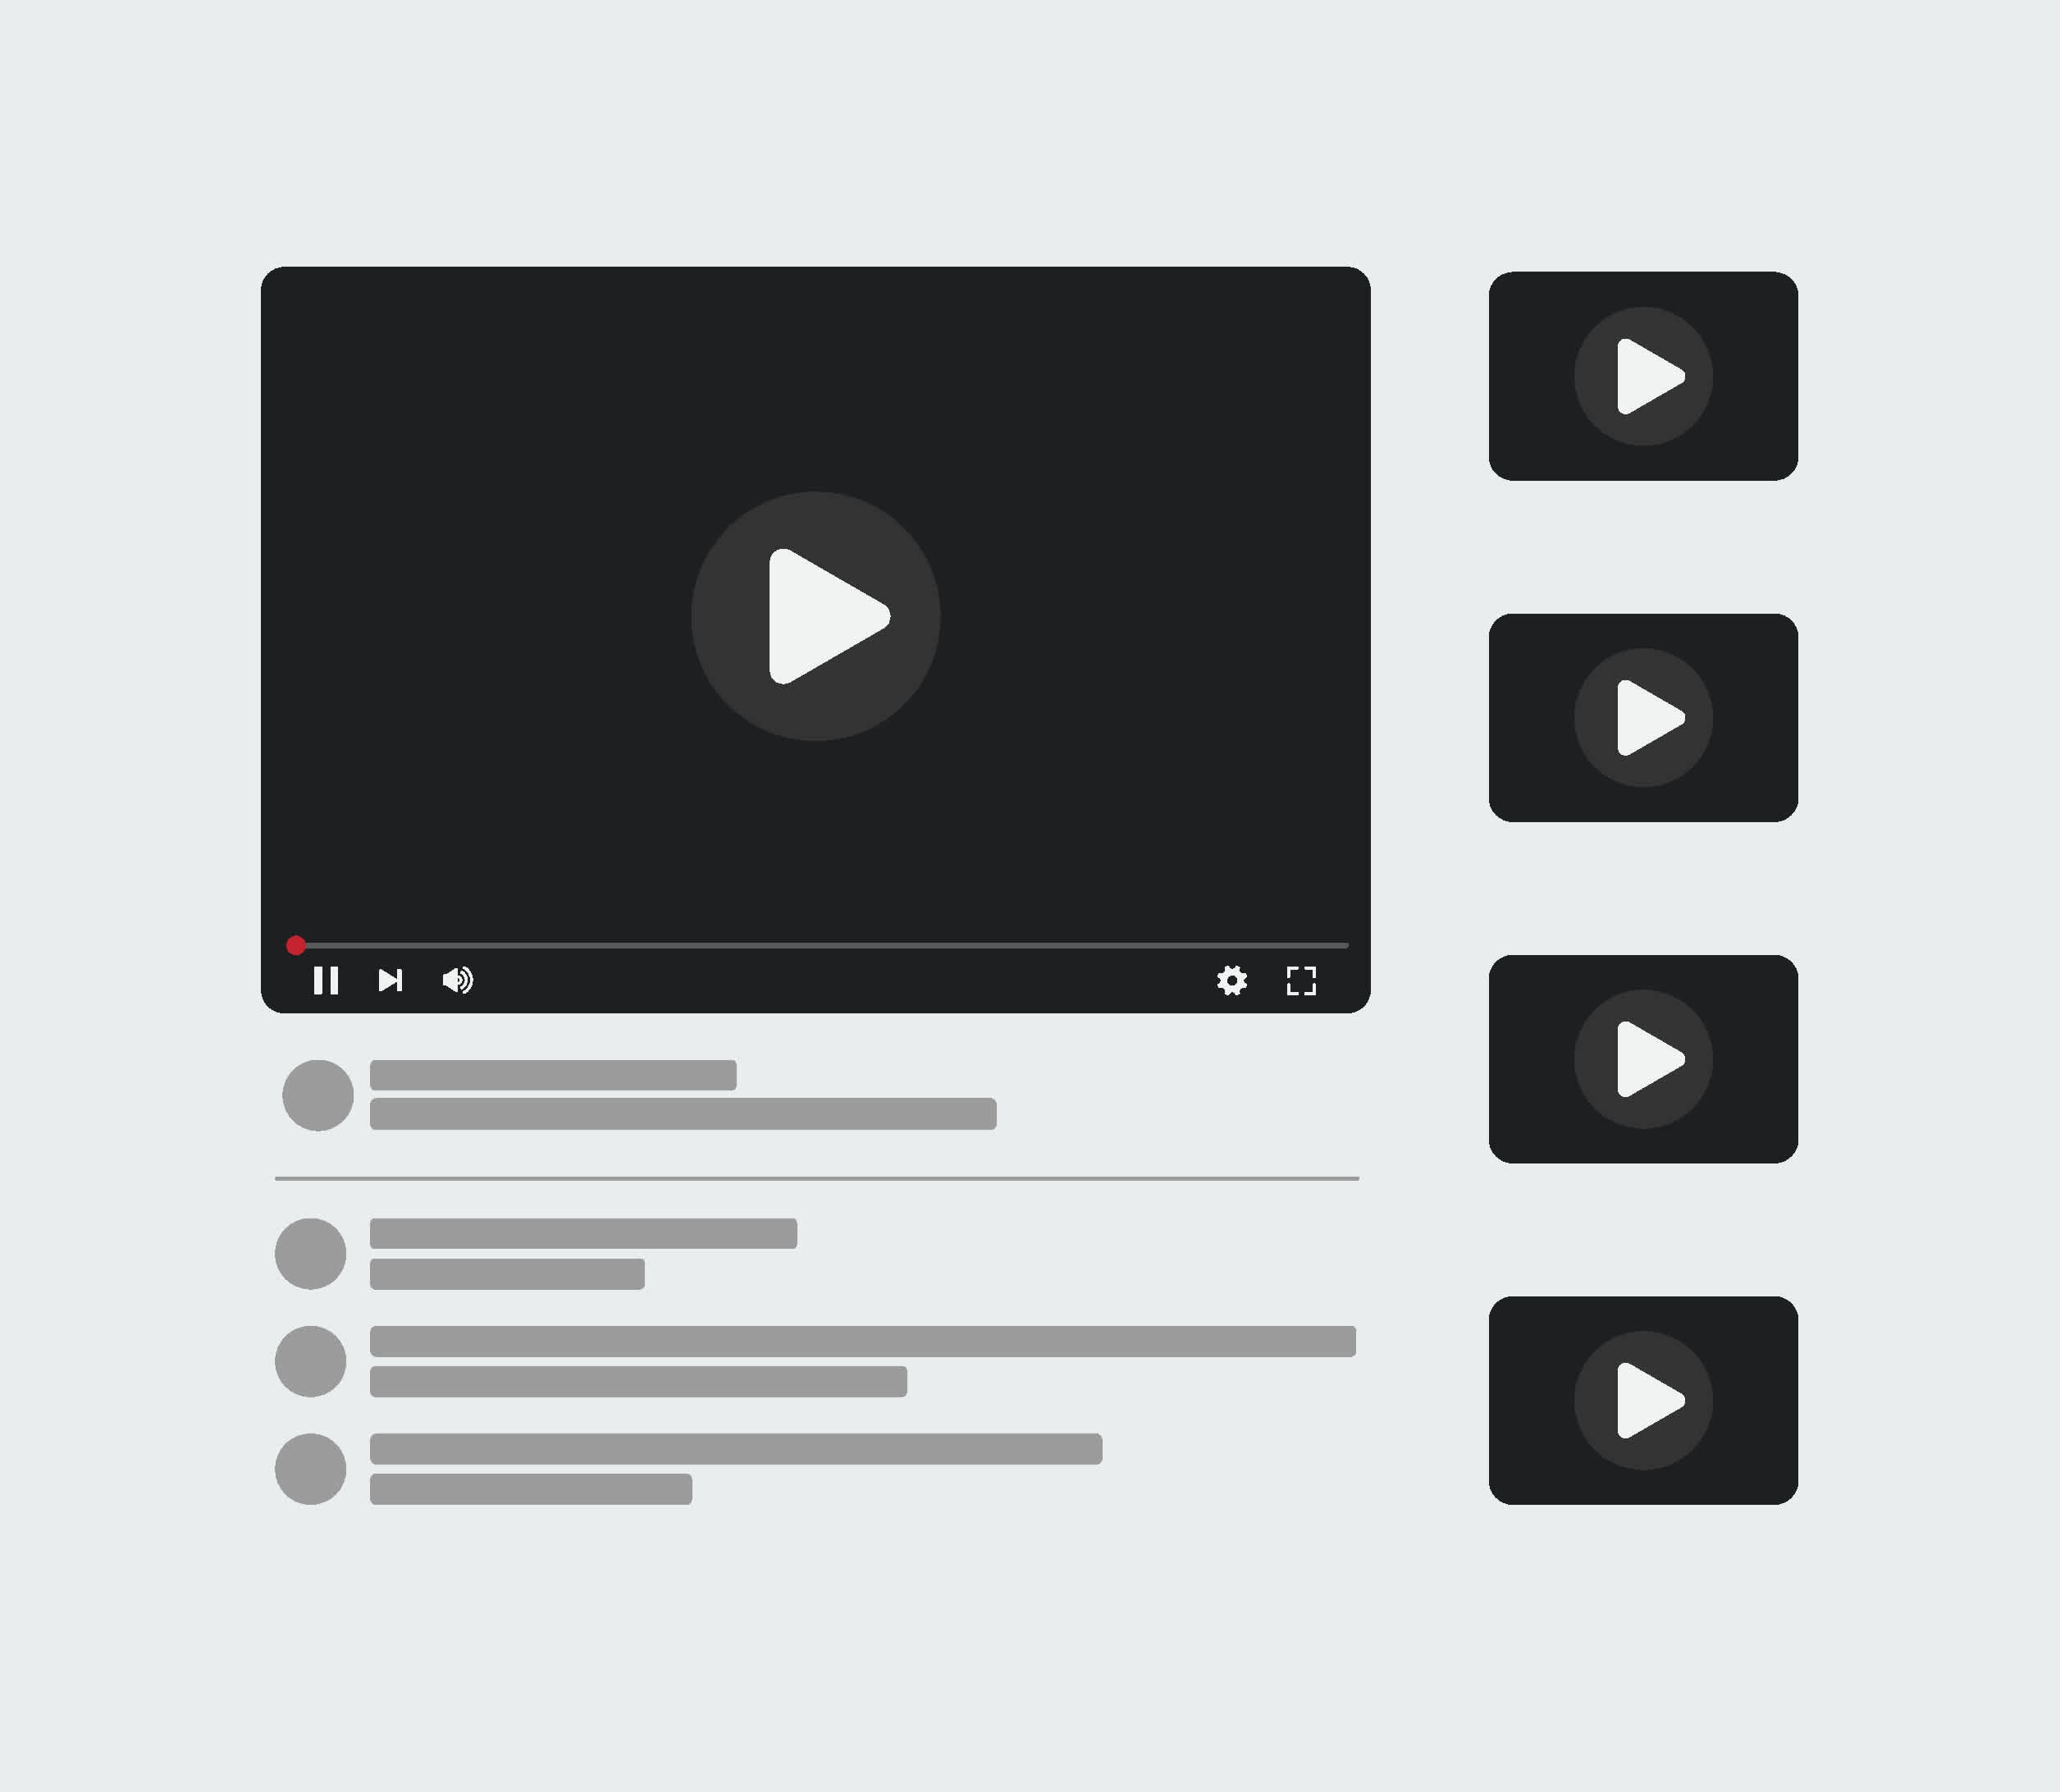 General image of a 'play' button usually associated with YouTube Videos. | Watermark